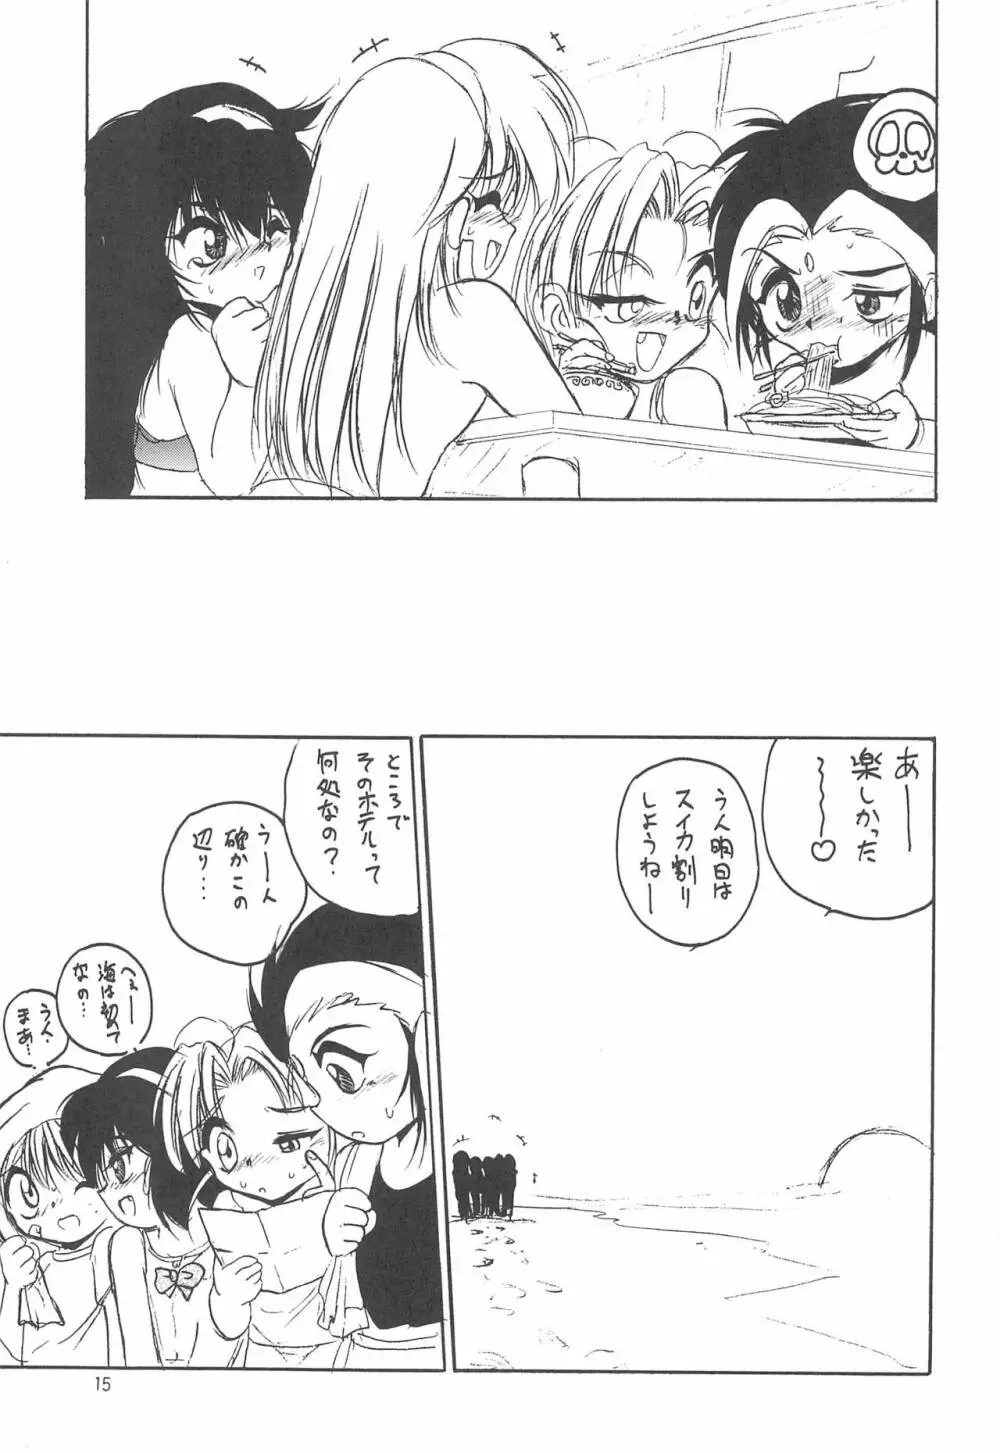 With Page.15